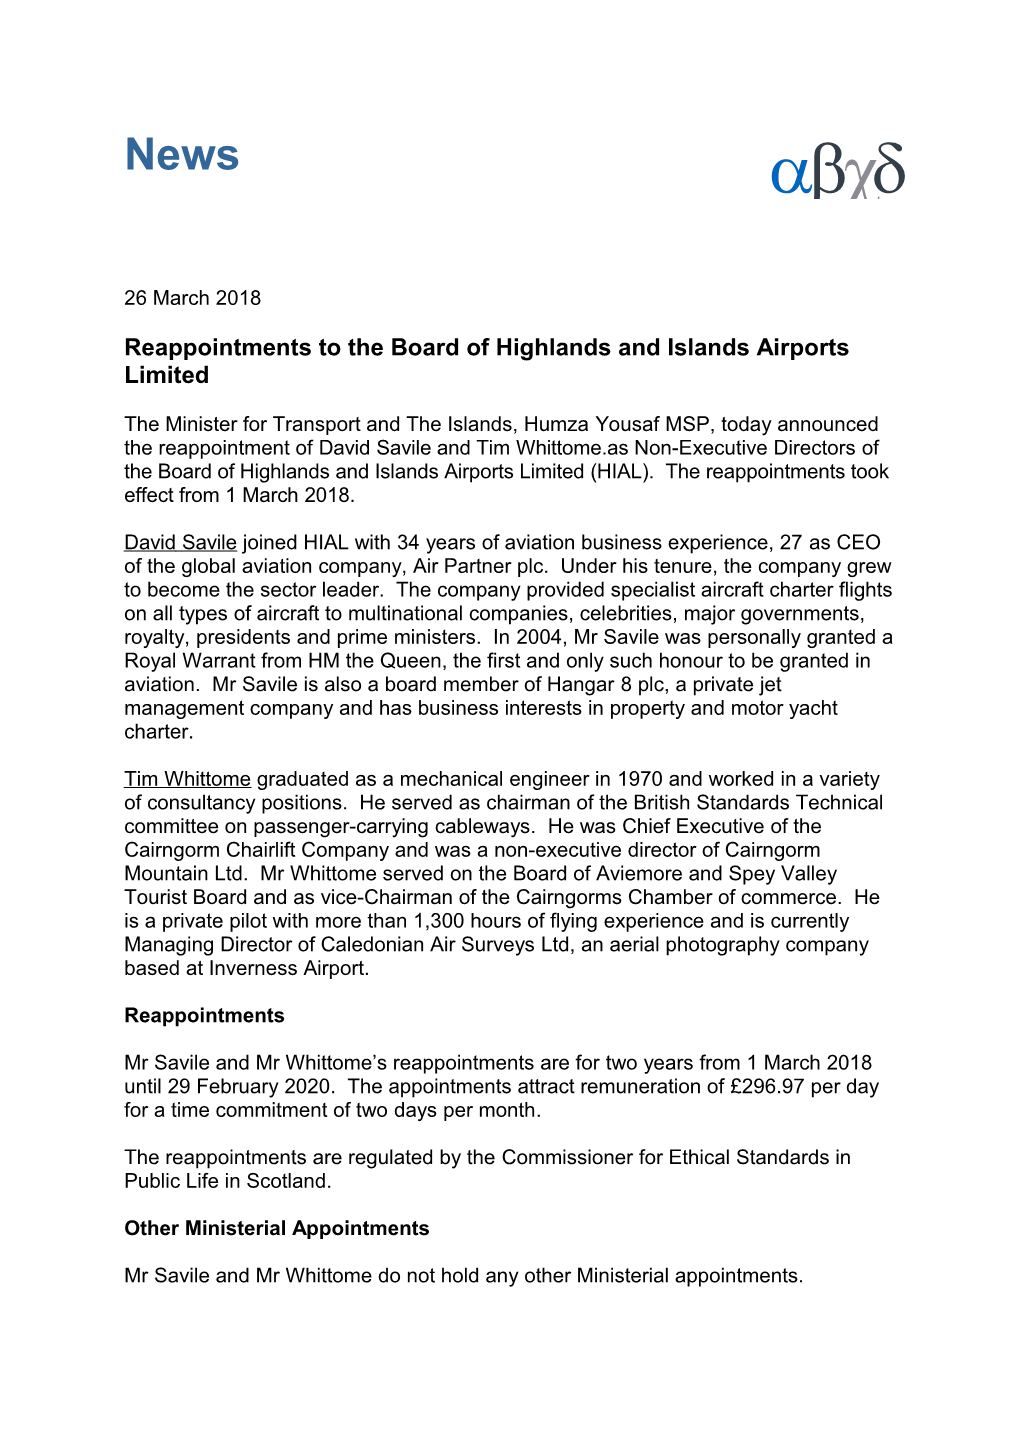 Reappointments to the Board of Highlands and Islands Airports Limited